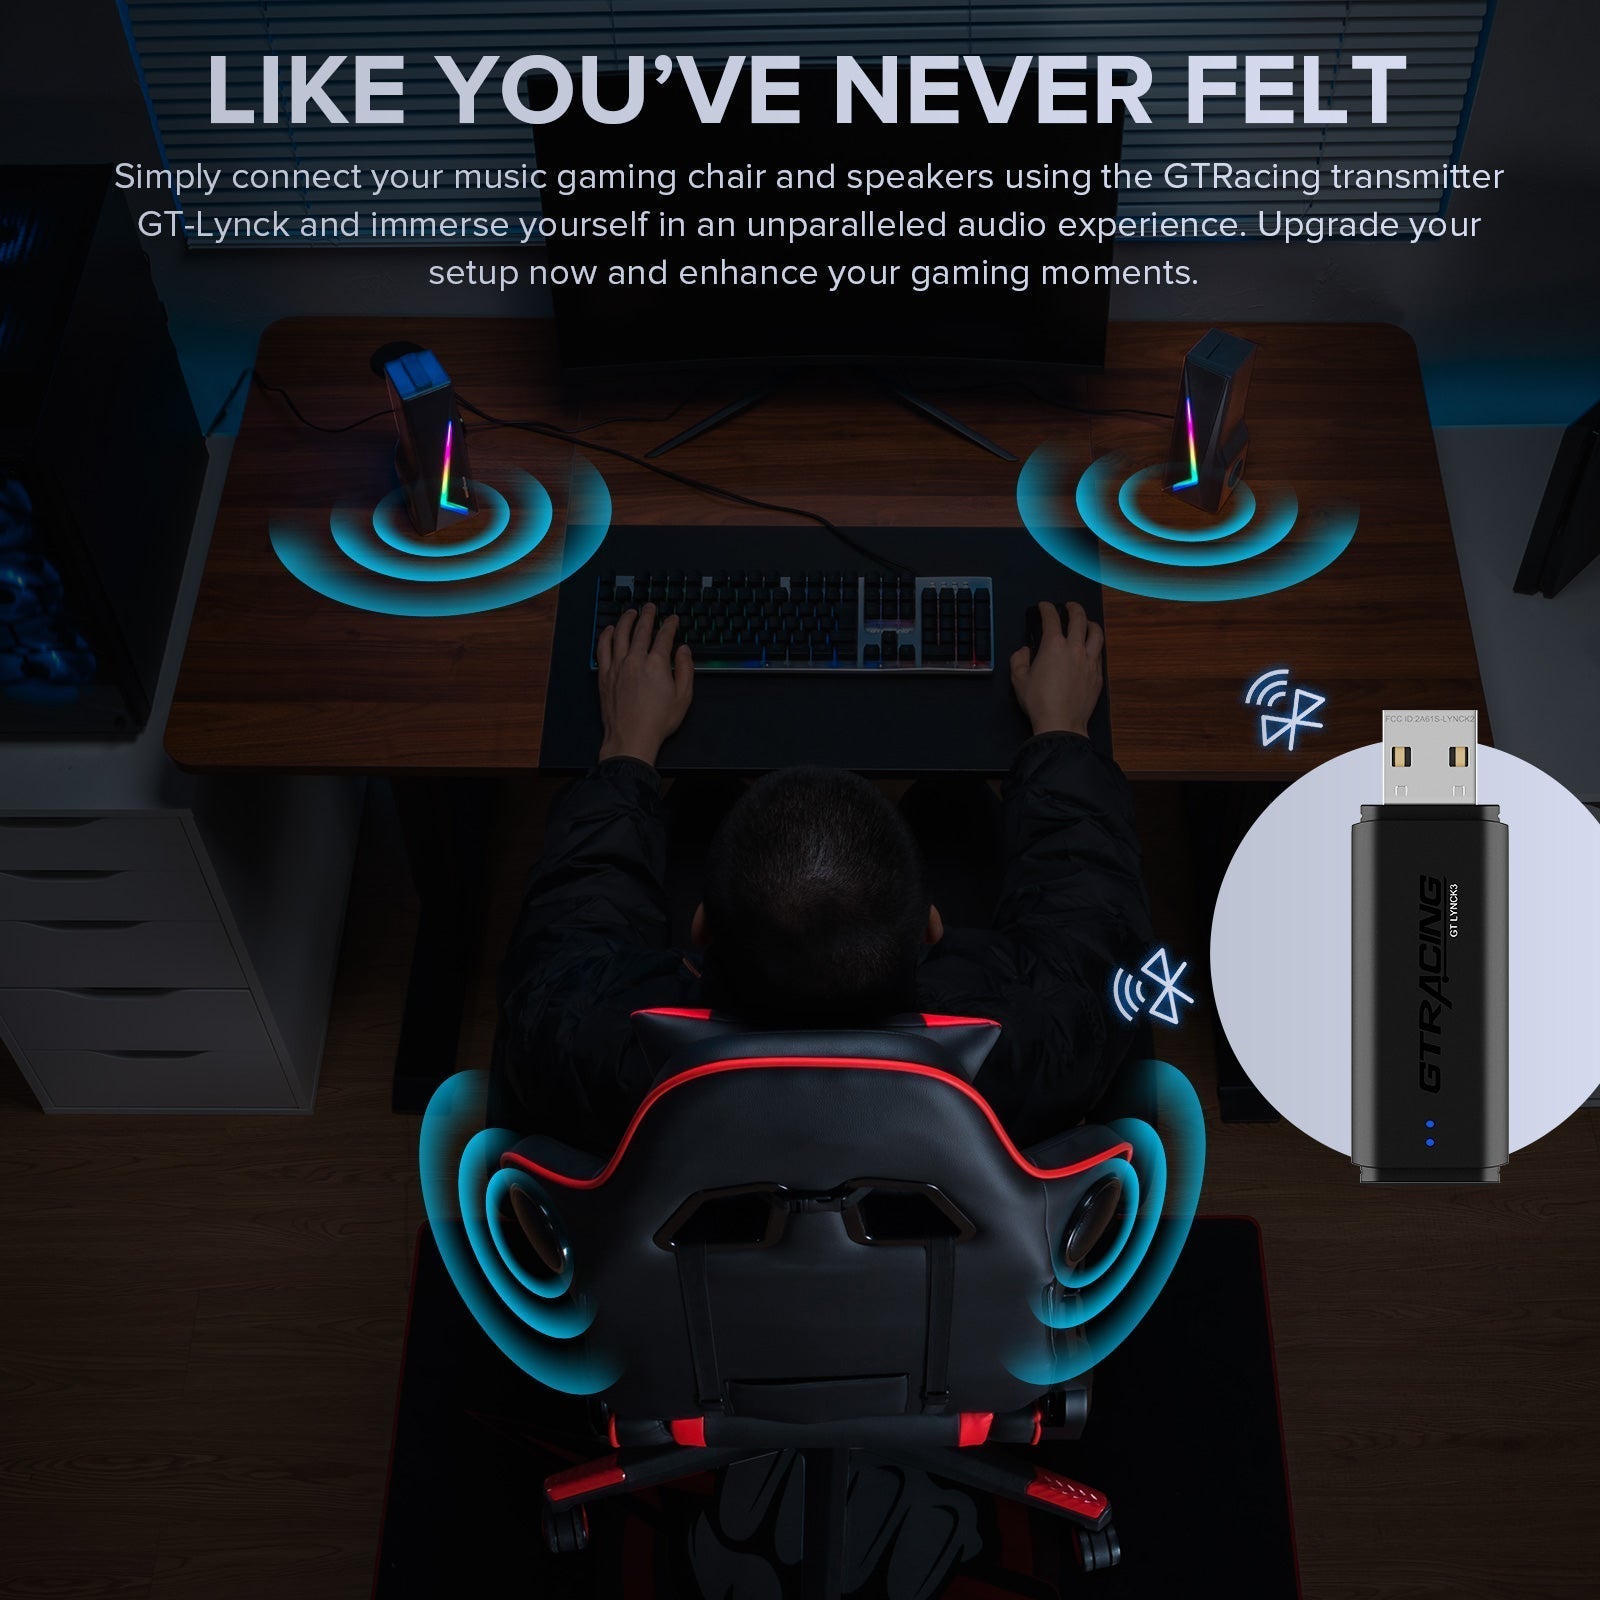 GTRACING 4D Surround System (Gaming Chair, Bluetooth Speaker, and USB transmitter 3 in 1) - GTRACING